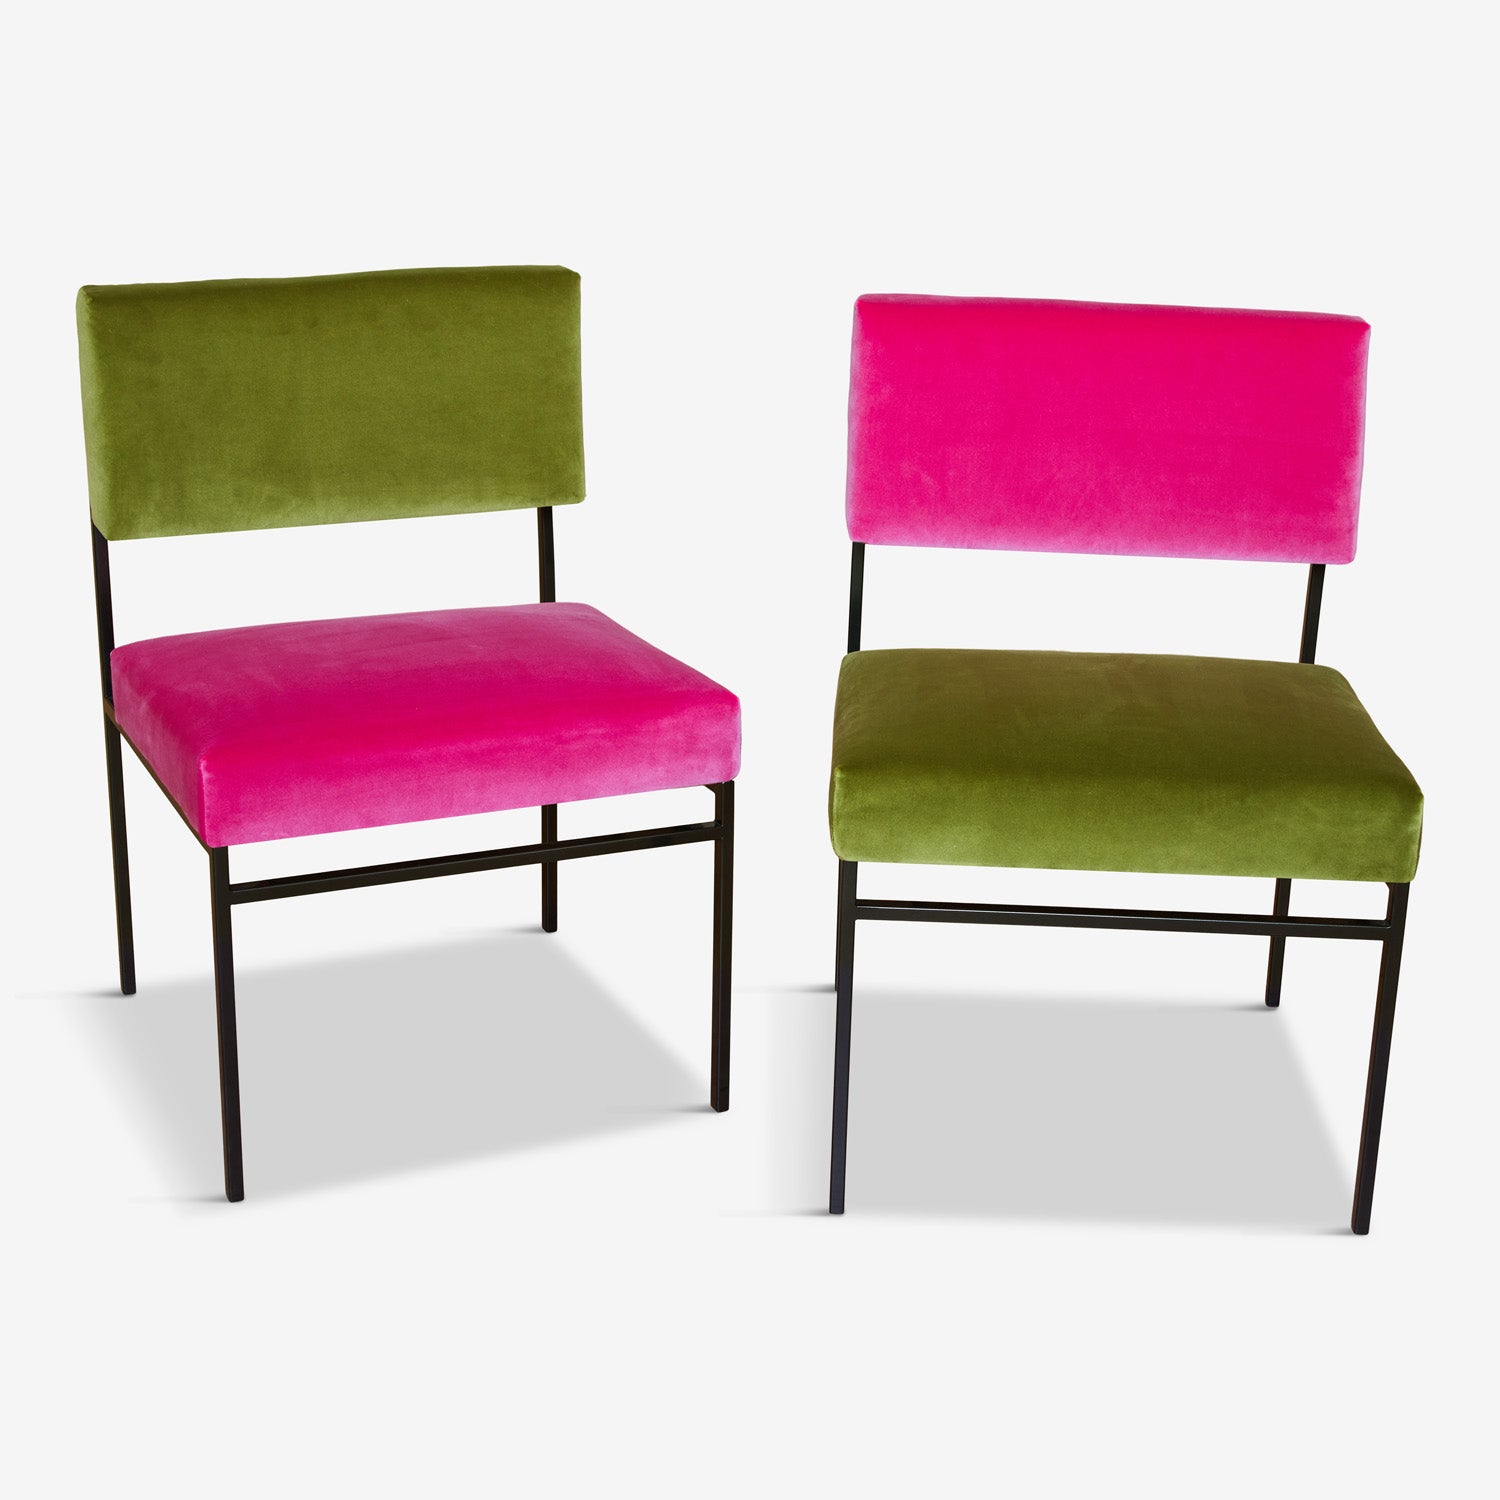 Aurea Dining Chair - green and pink velvet front view